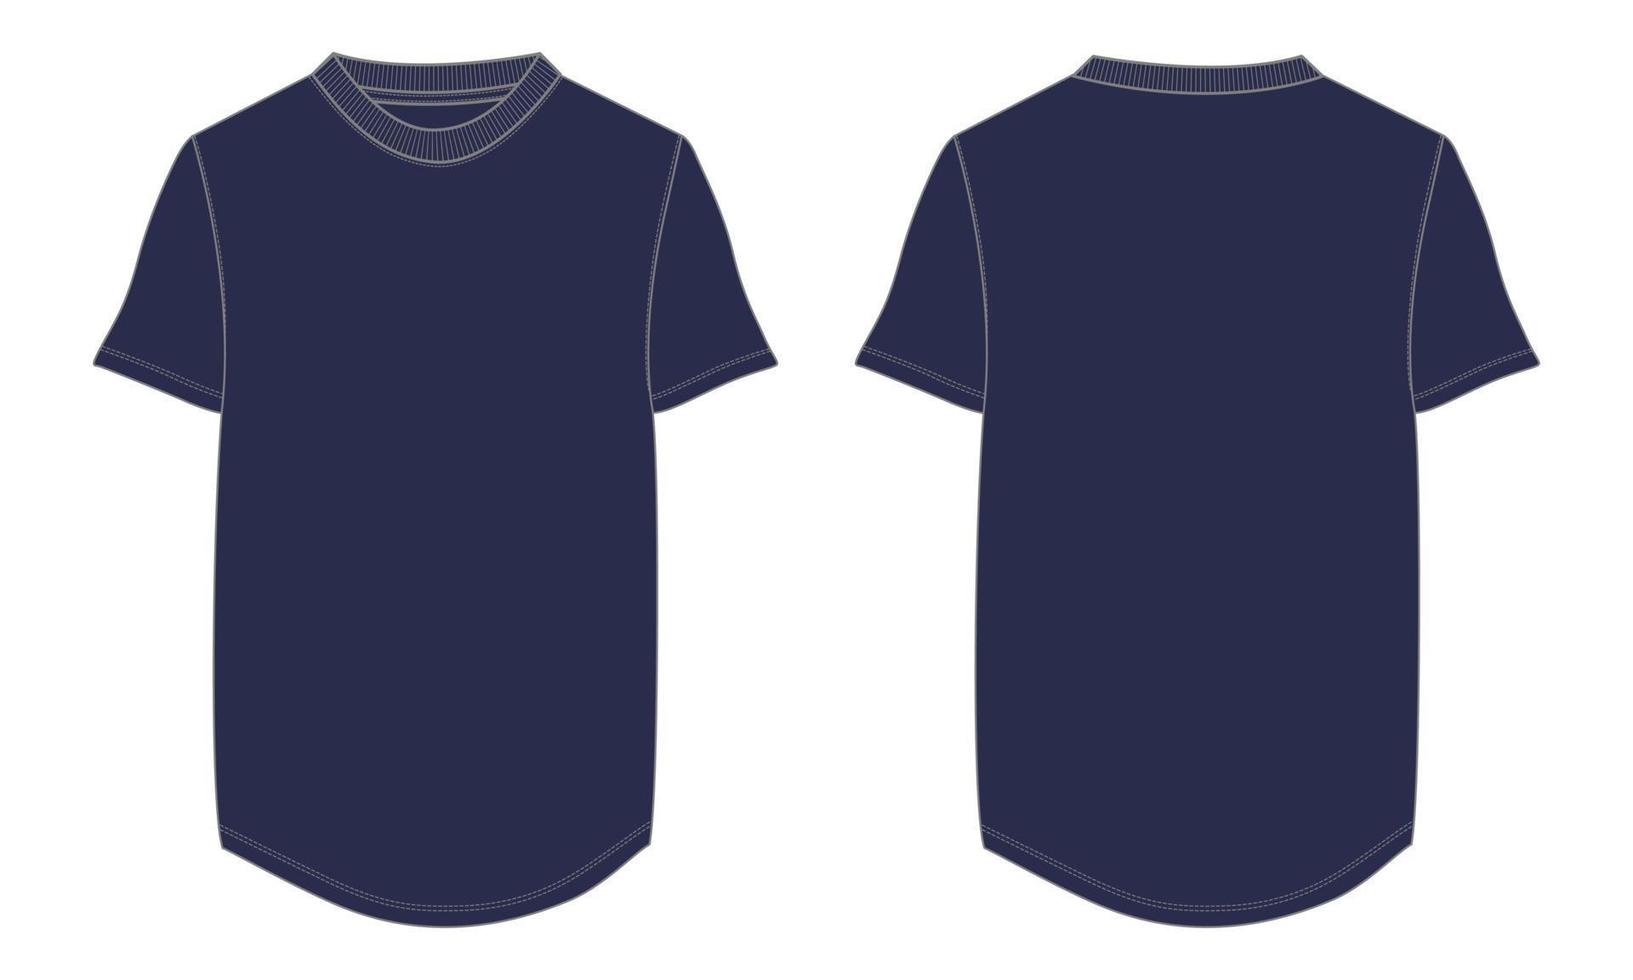 Short Sleeve t shirt technical fashion flat sketch vector illustration Navy Color template front and back views. Apparel design mock up card easy edit and customizable